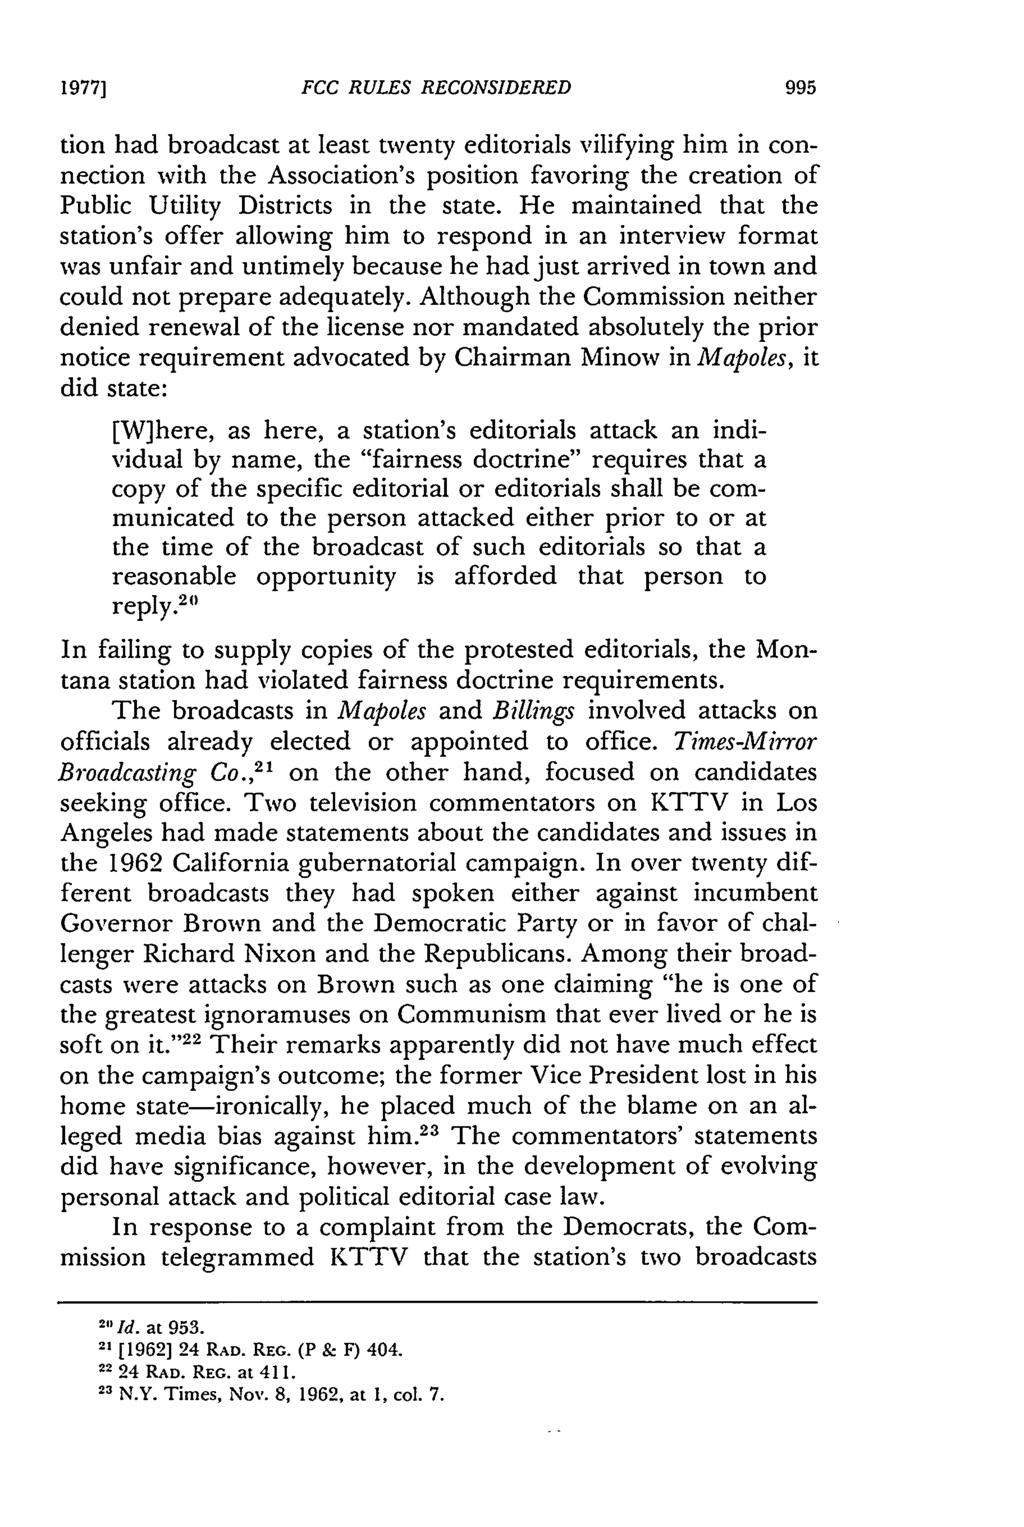 1977] FCC RULES RECONSIDERED tion had broadcast at least twenty editorials vilifying him in connection with the Association's position favoring the creation of Public Utility Districts in the state.